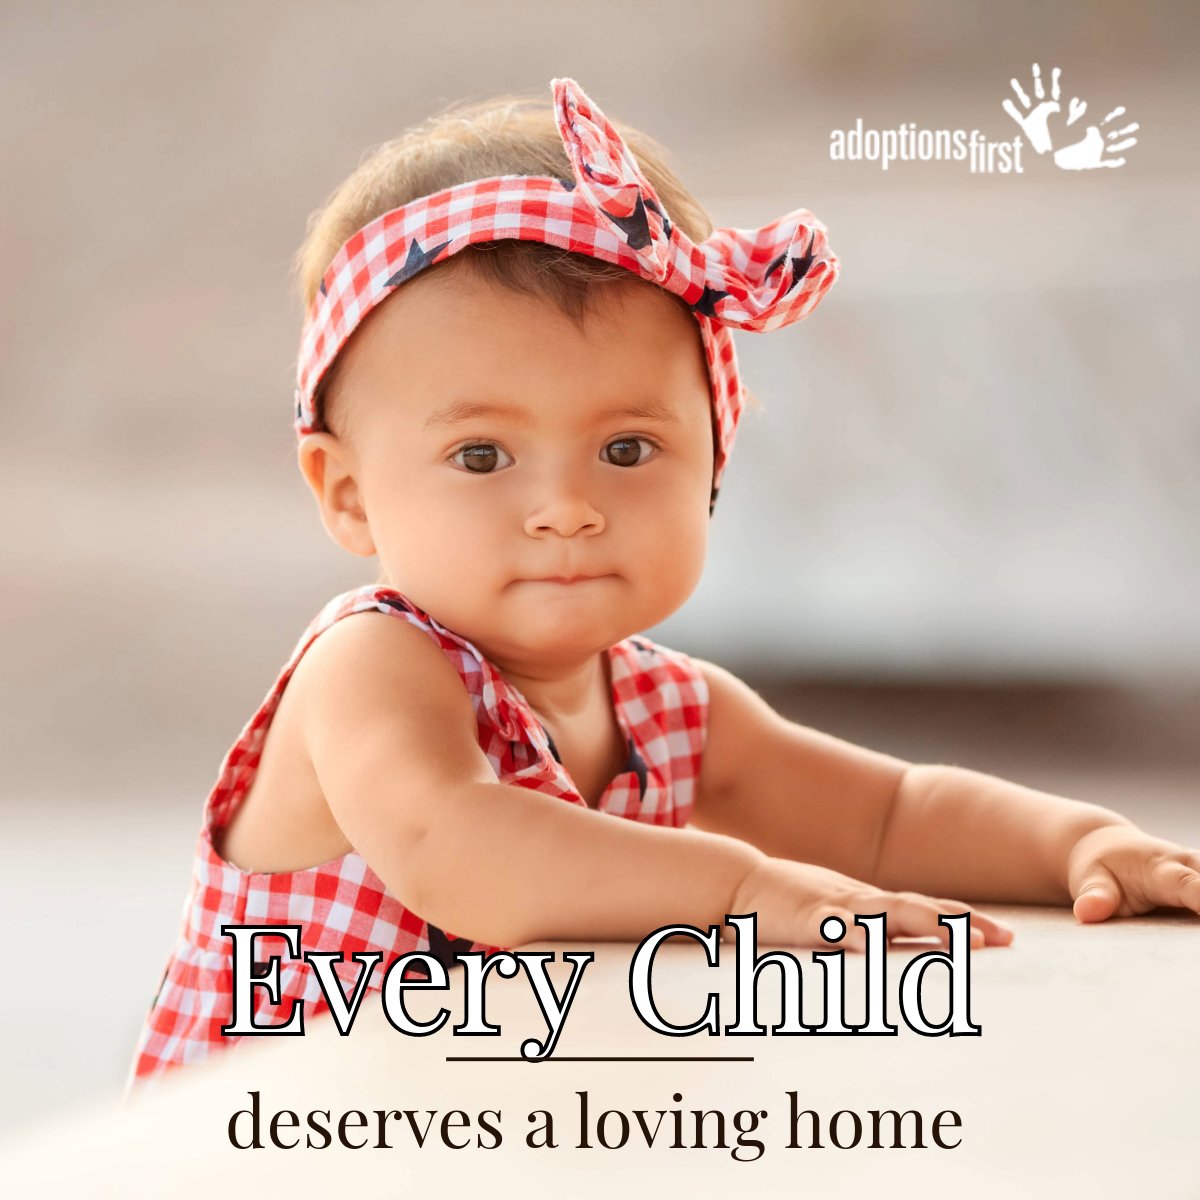 Every child deserves a loving home. ❤
To discuss our adoption process, please text or call Renee any time at 646-988-6281 or call 1-800-658-8284.

Learn more at adoptionsfirst.com

#adoption #openadoption #adoptionrocks #birthmom #birthmomstrong #adoptiveparents